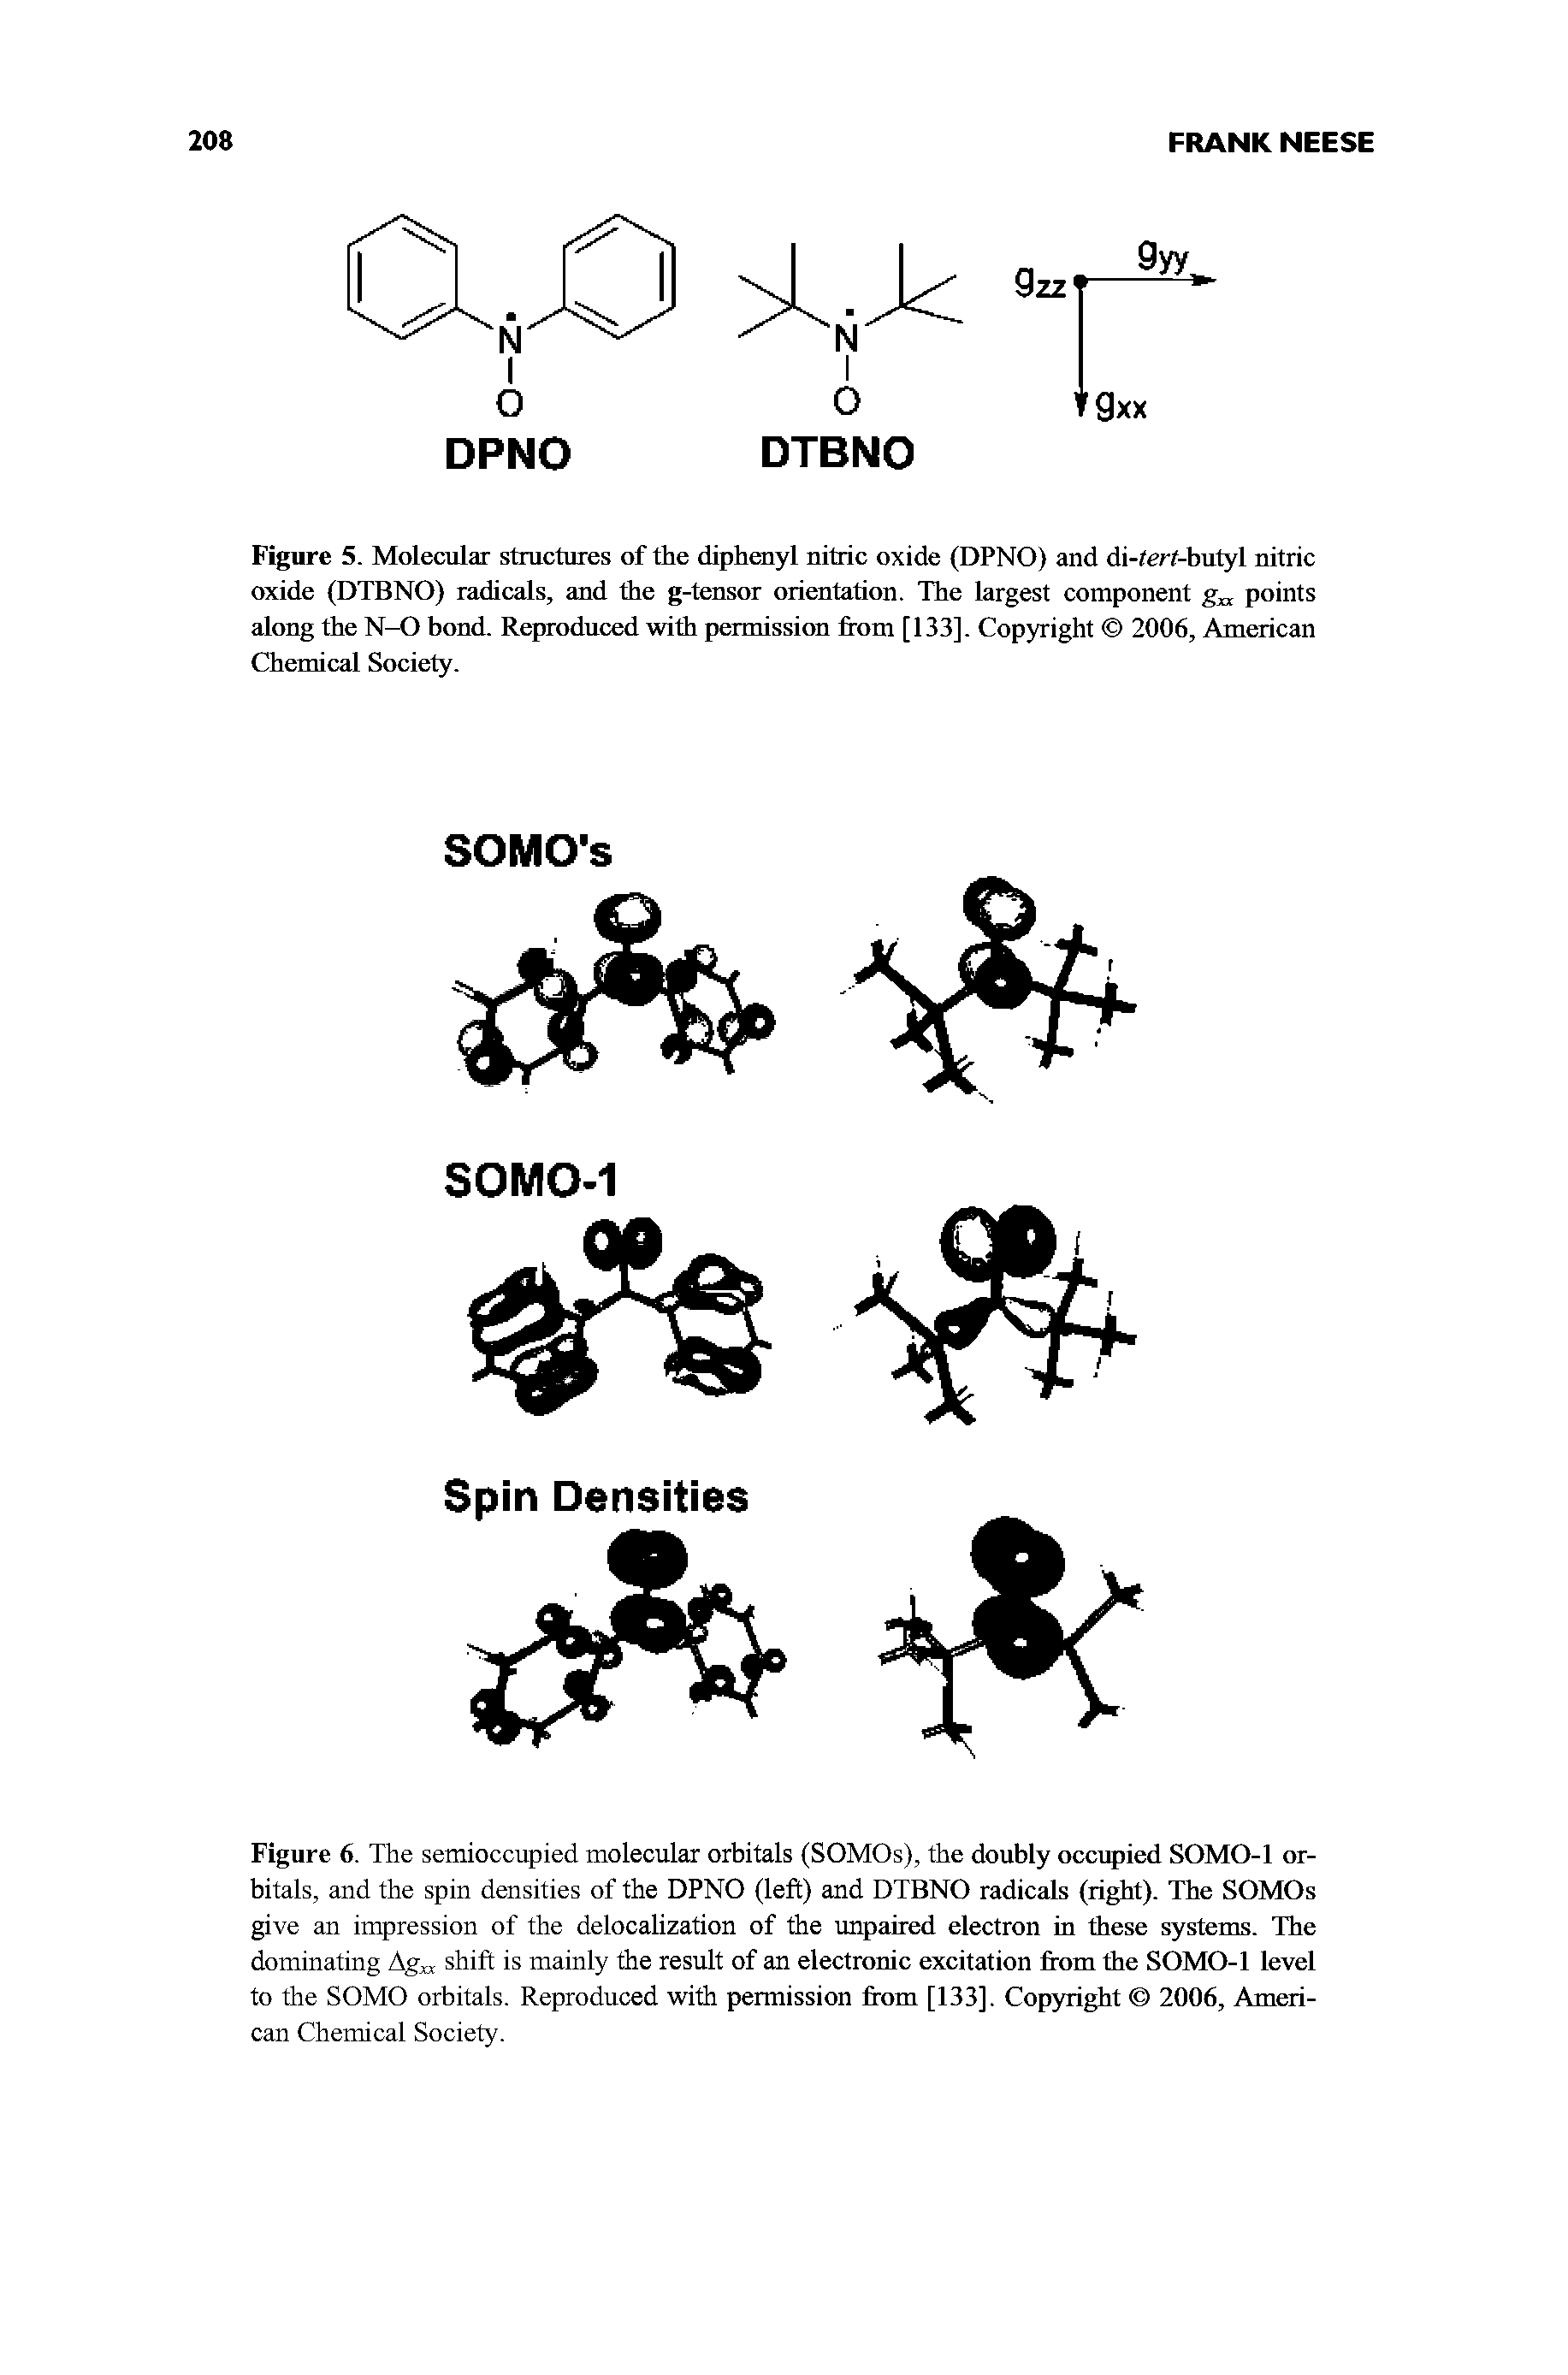 Figure 5. Molecular structures of the diphenyl nitric oxide (DPNO) and di-ieri-butyl nitric oxide (DTBNO) radicals, and the g-tensor orientation. The largest component g points along the N-O bond. Reproduced with permission from [133]. Copyright 2006, American Chemical Society.